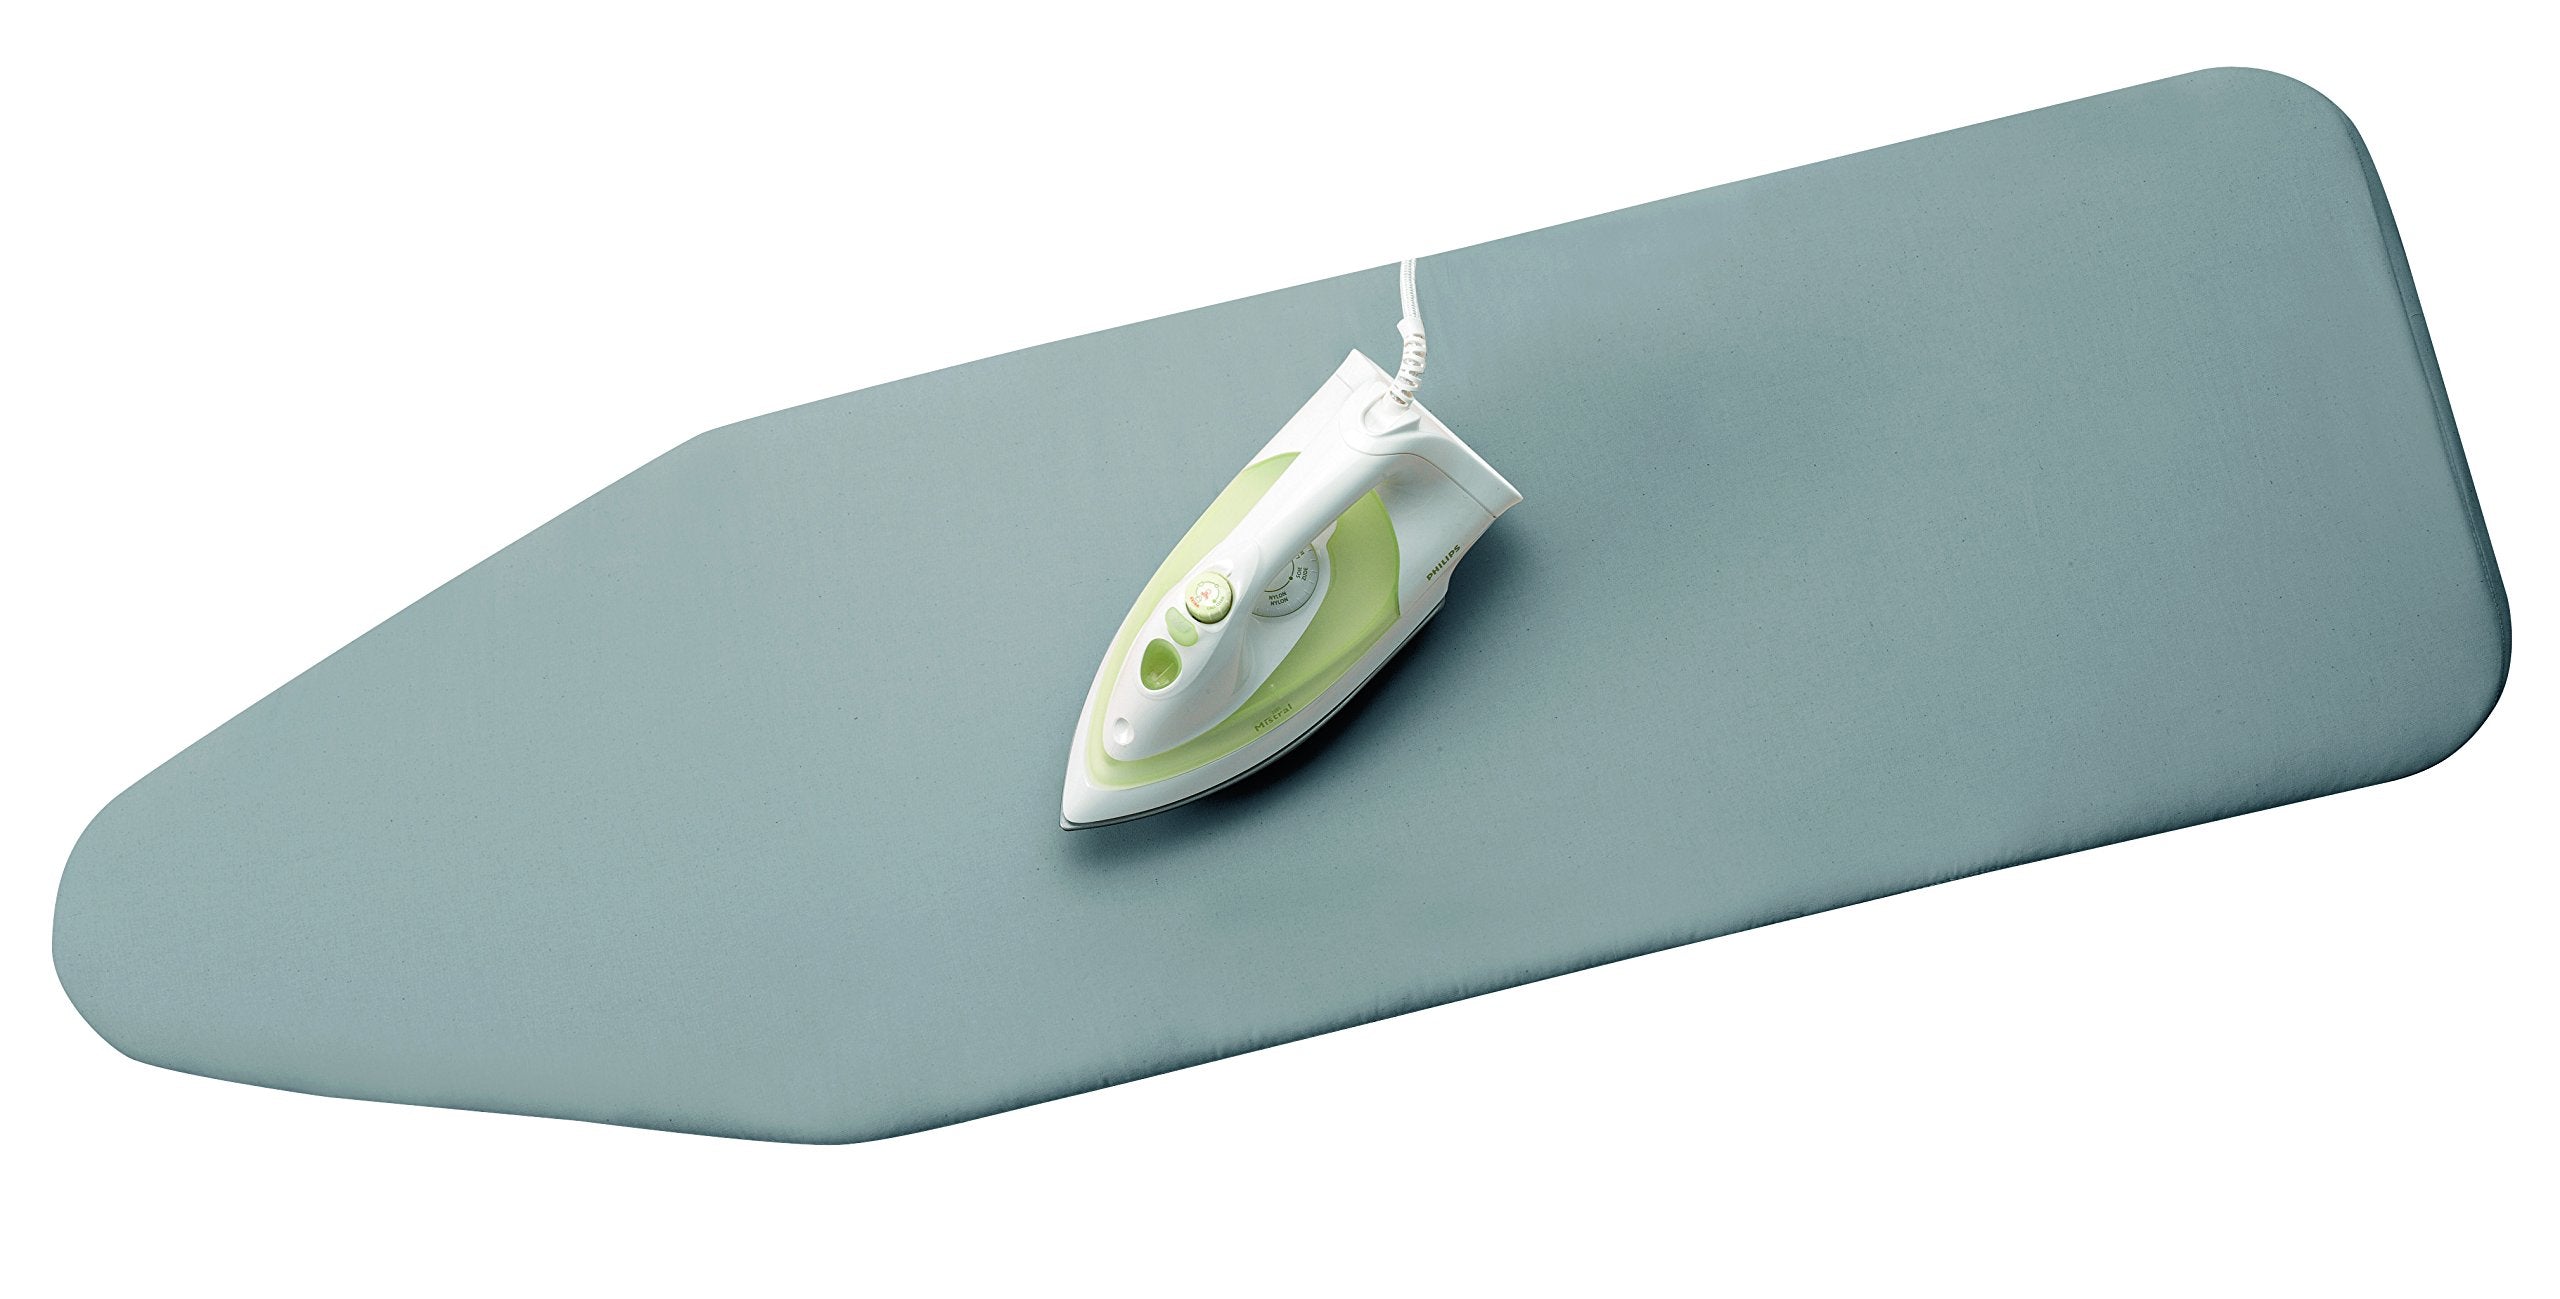 Brabantia Ironing Board Cover 53 x 18 Inch (Size D, Extra Large) Silver Metallic  - Like New